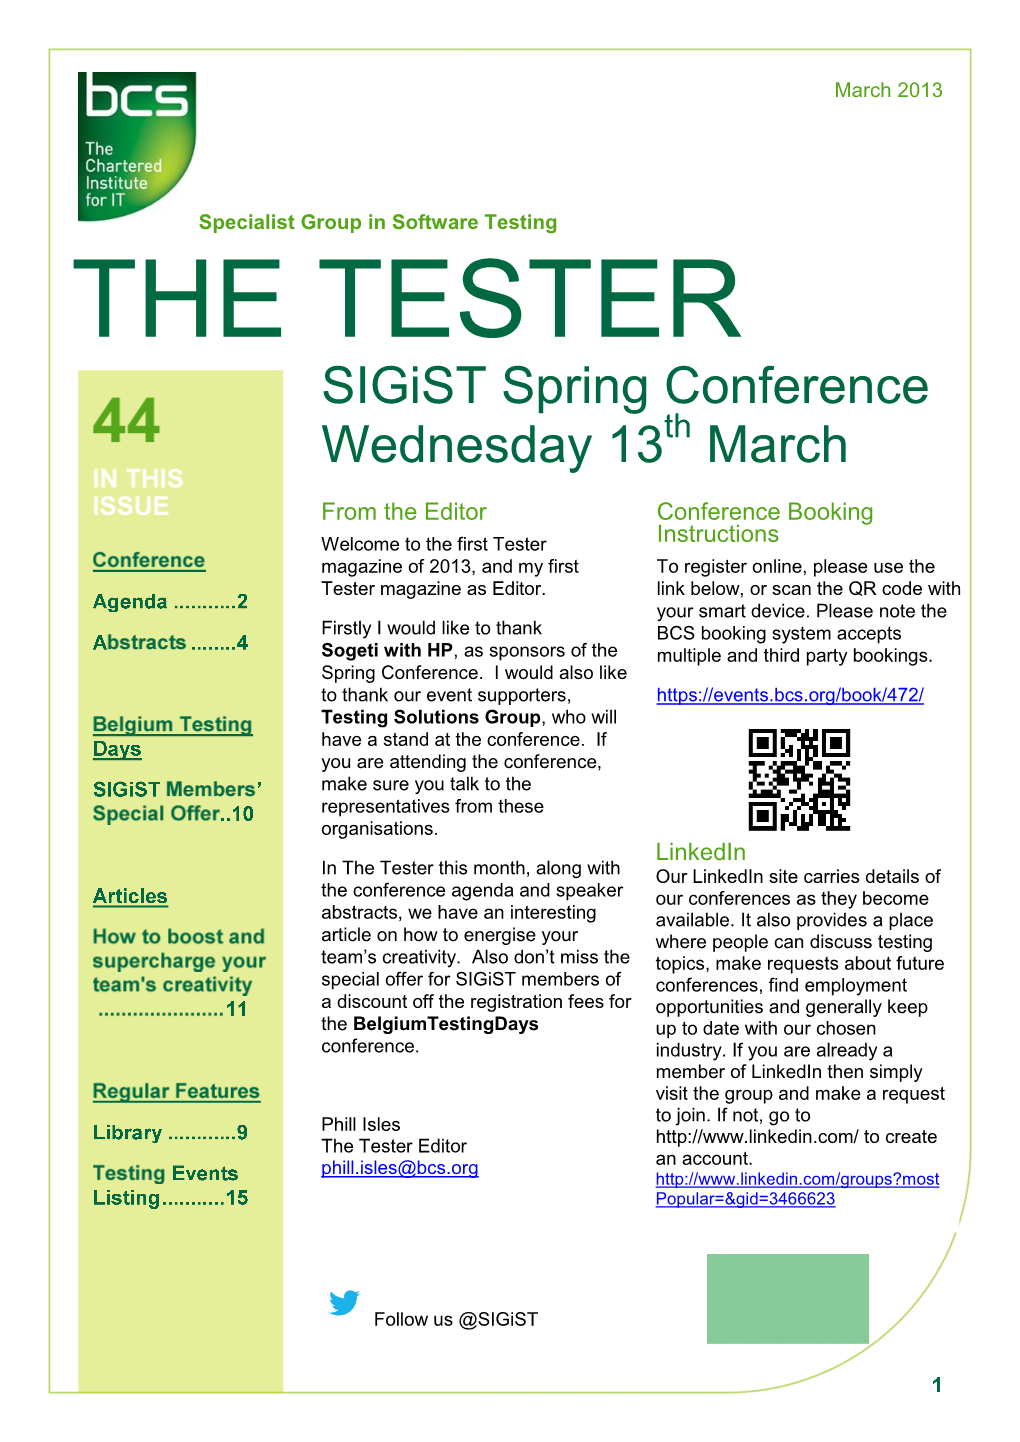 THE TESTER Sigist Spring Conference Wednesday 13Th March